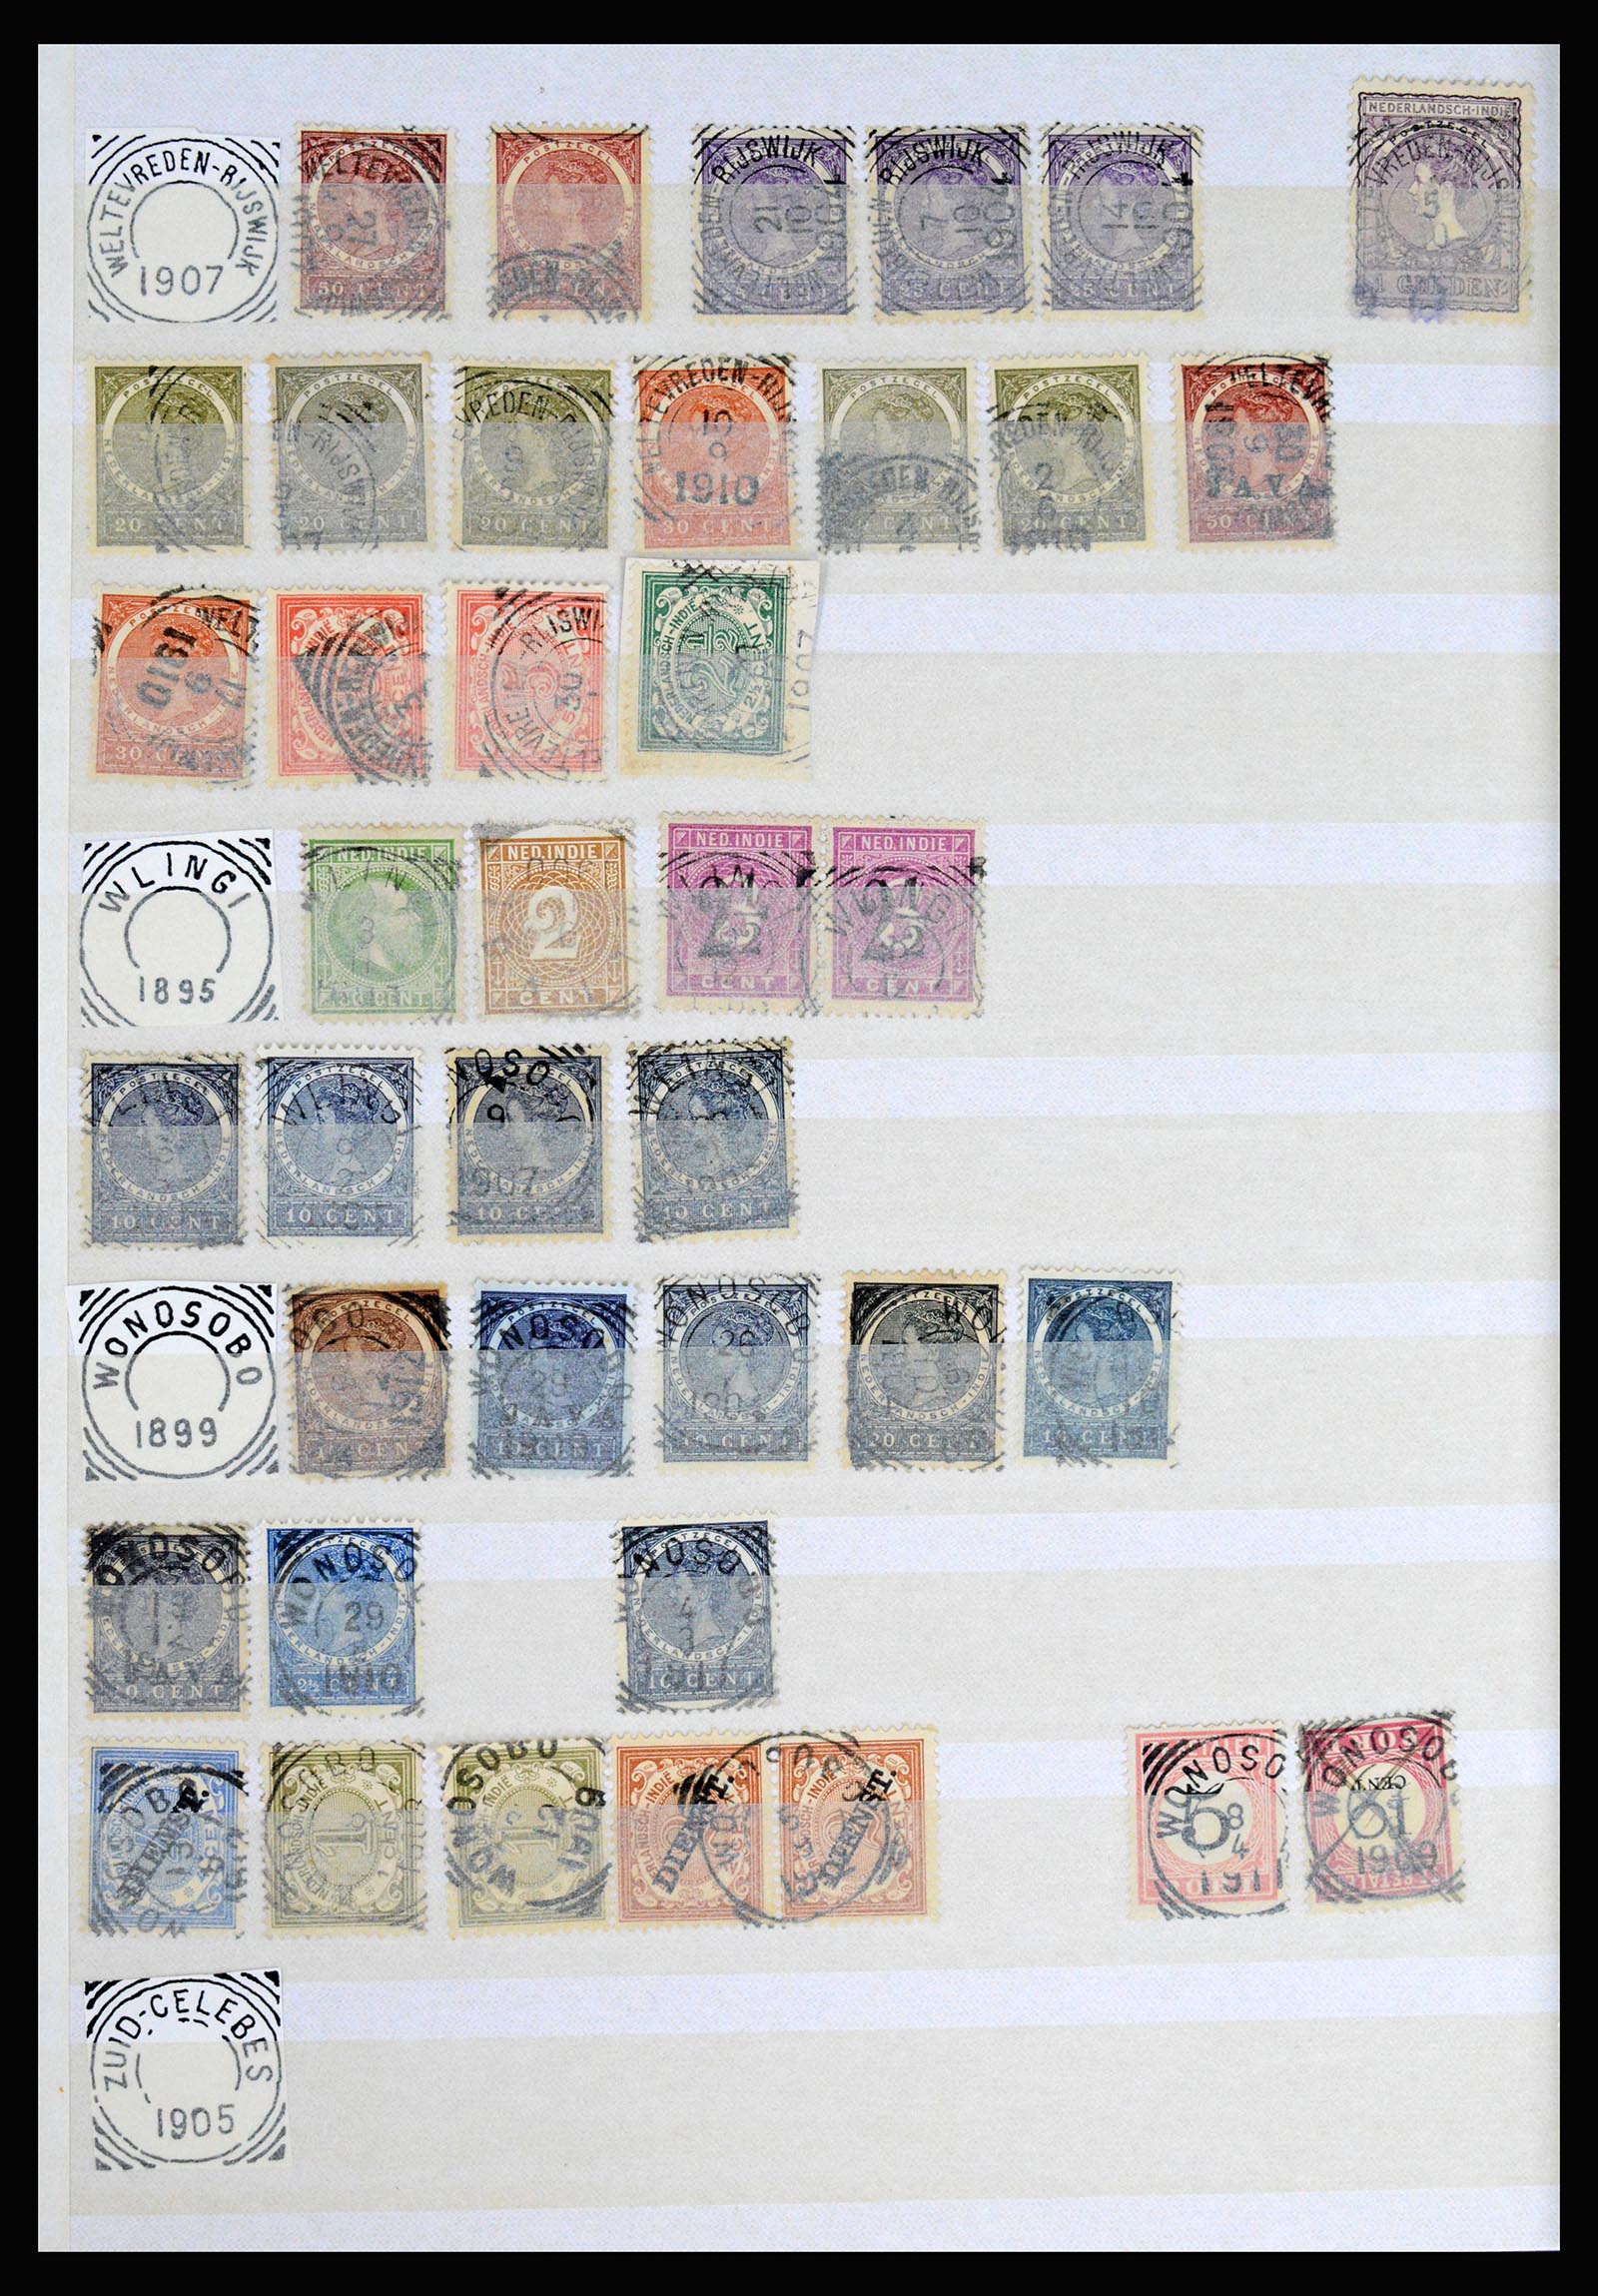 36839 101 - Stamp collection 36839 Dutch east Indies square cancels.